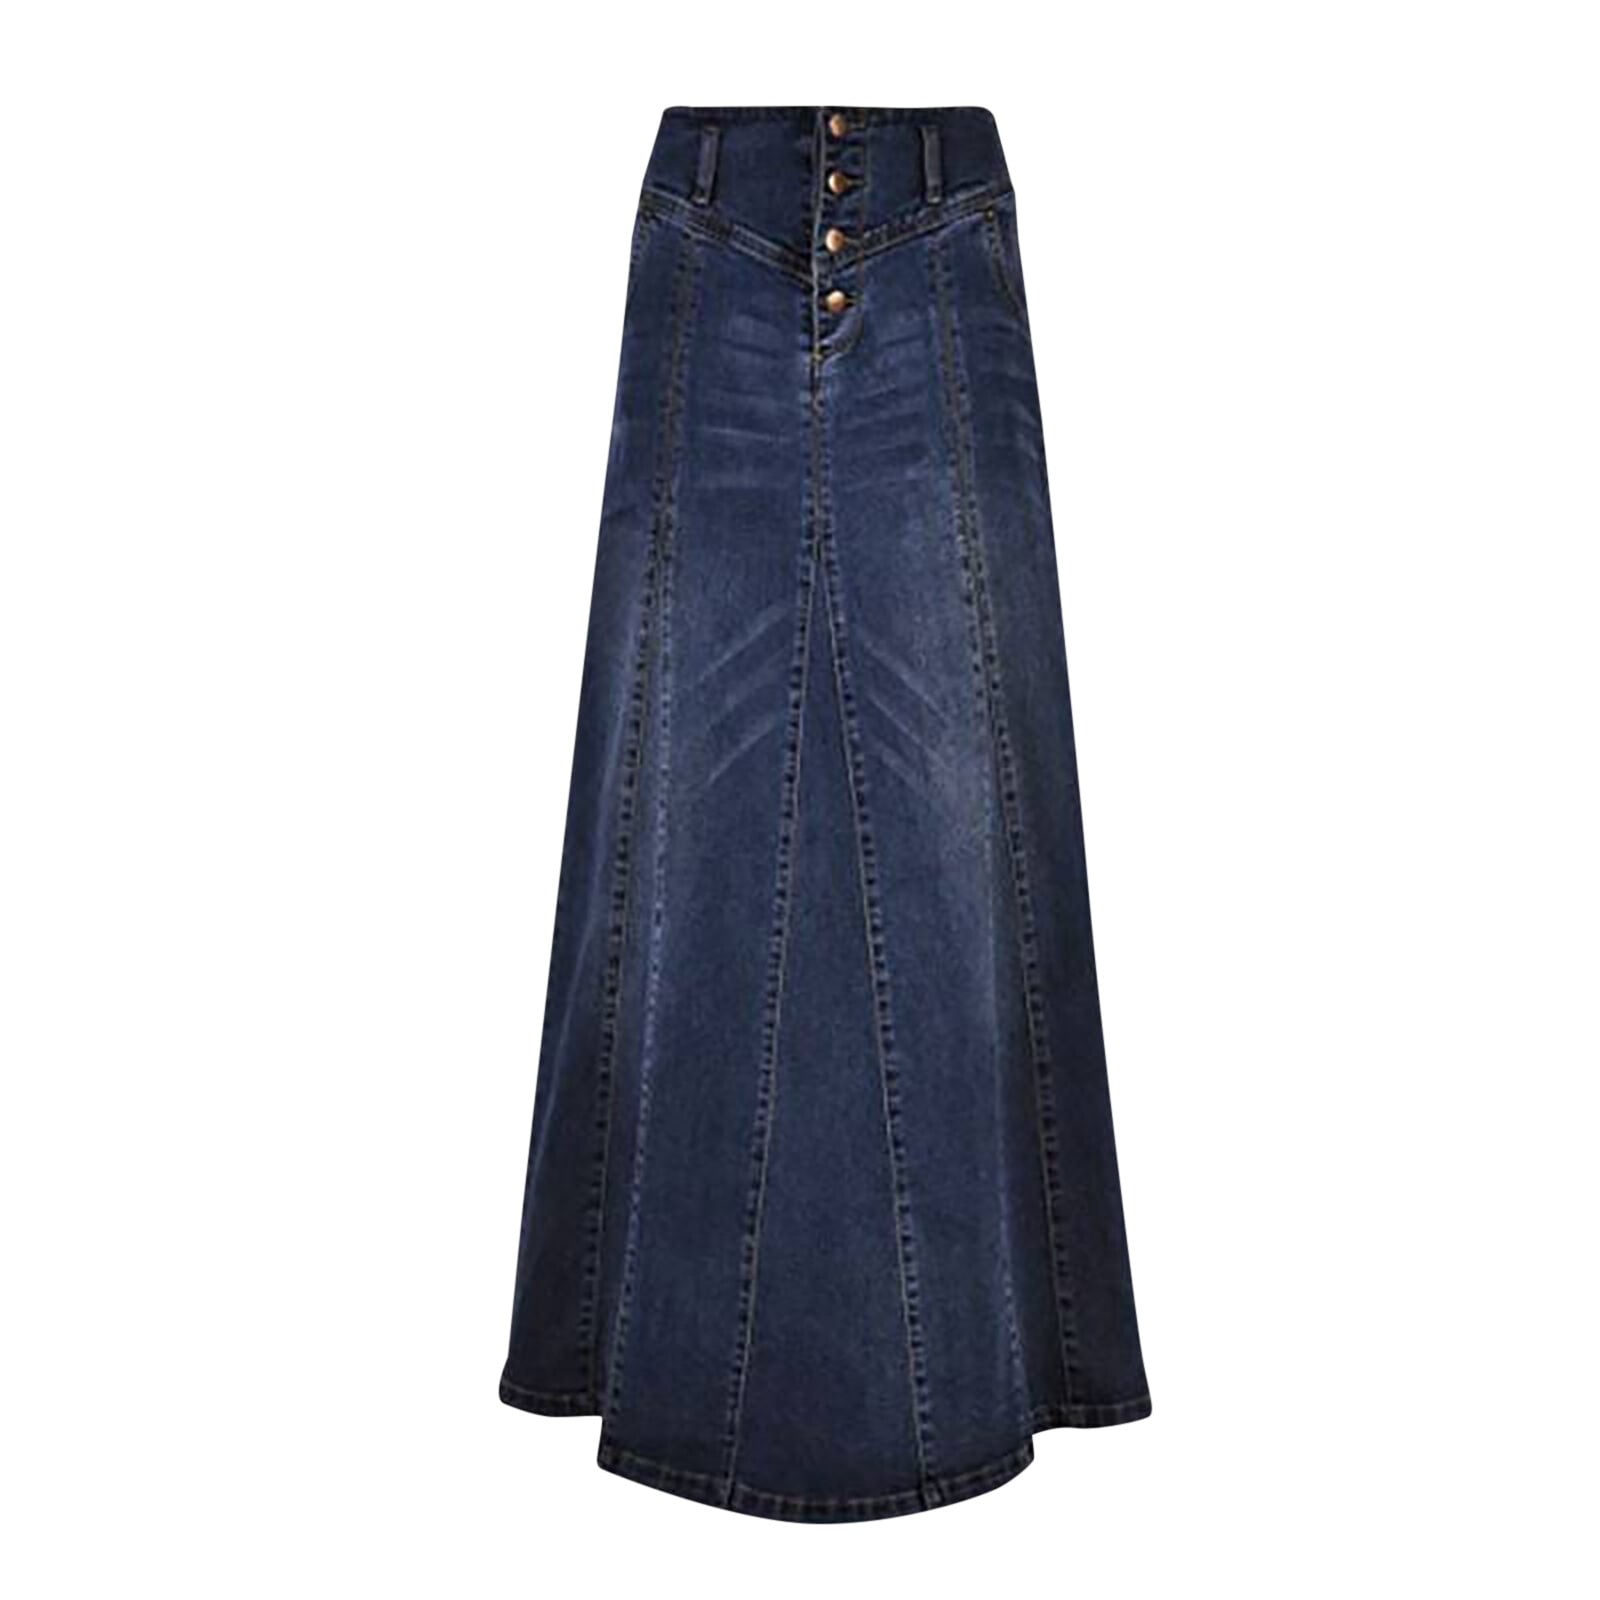 TAIAOJING Women's Short Jean Skirt Retro Exposure Button Fly Packaged A ...